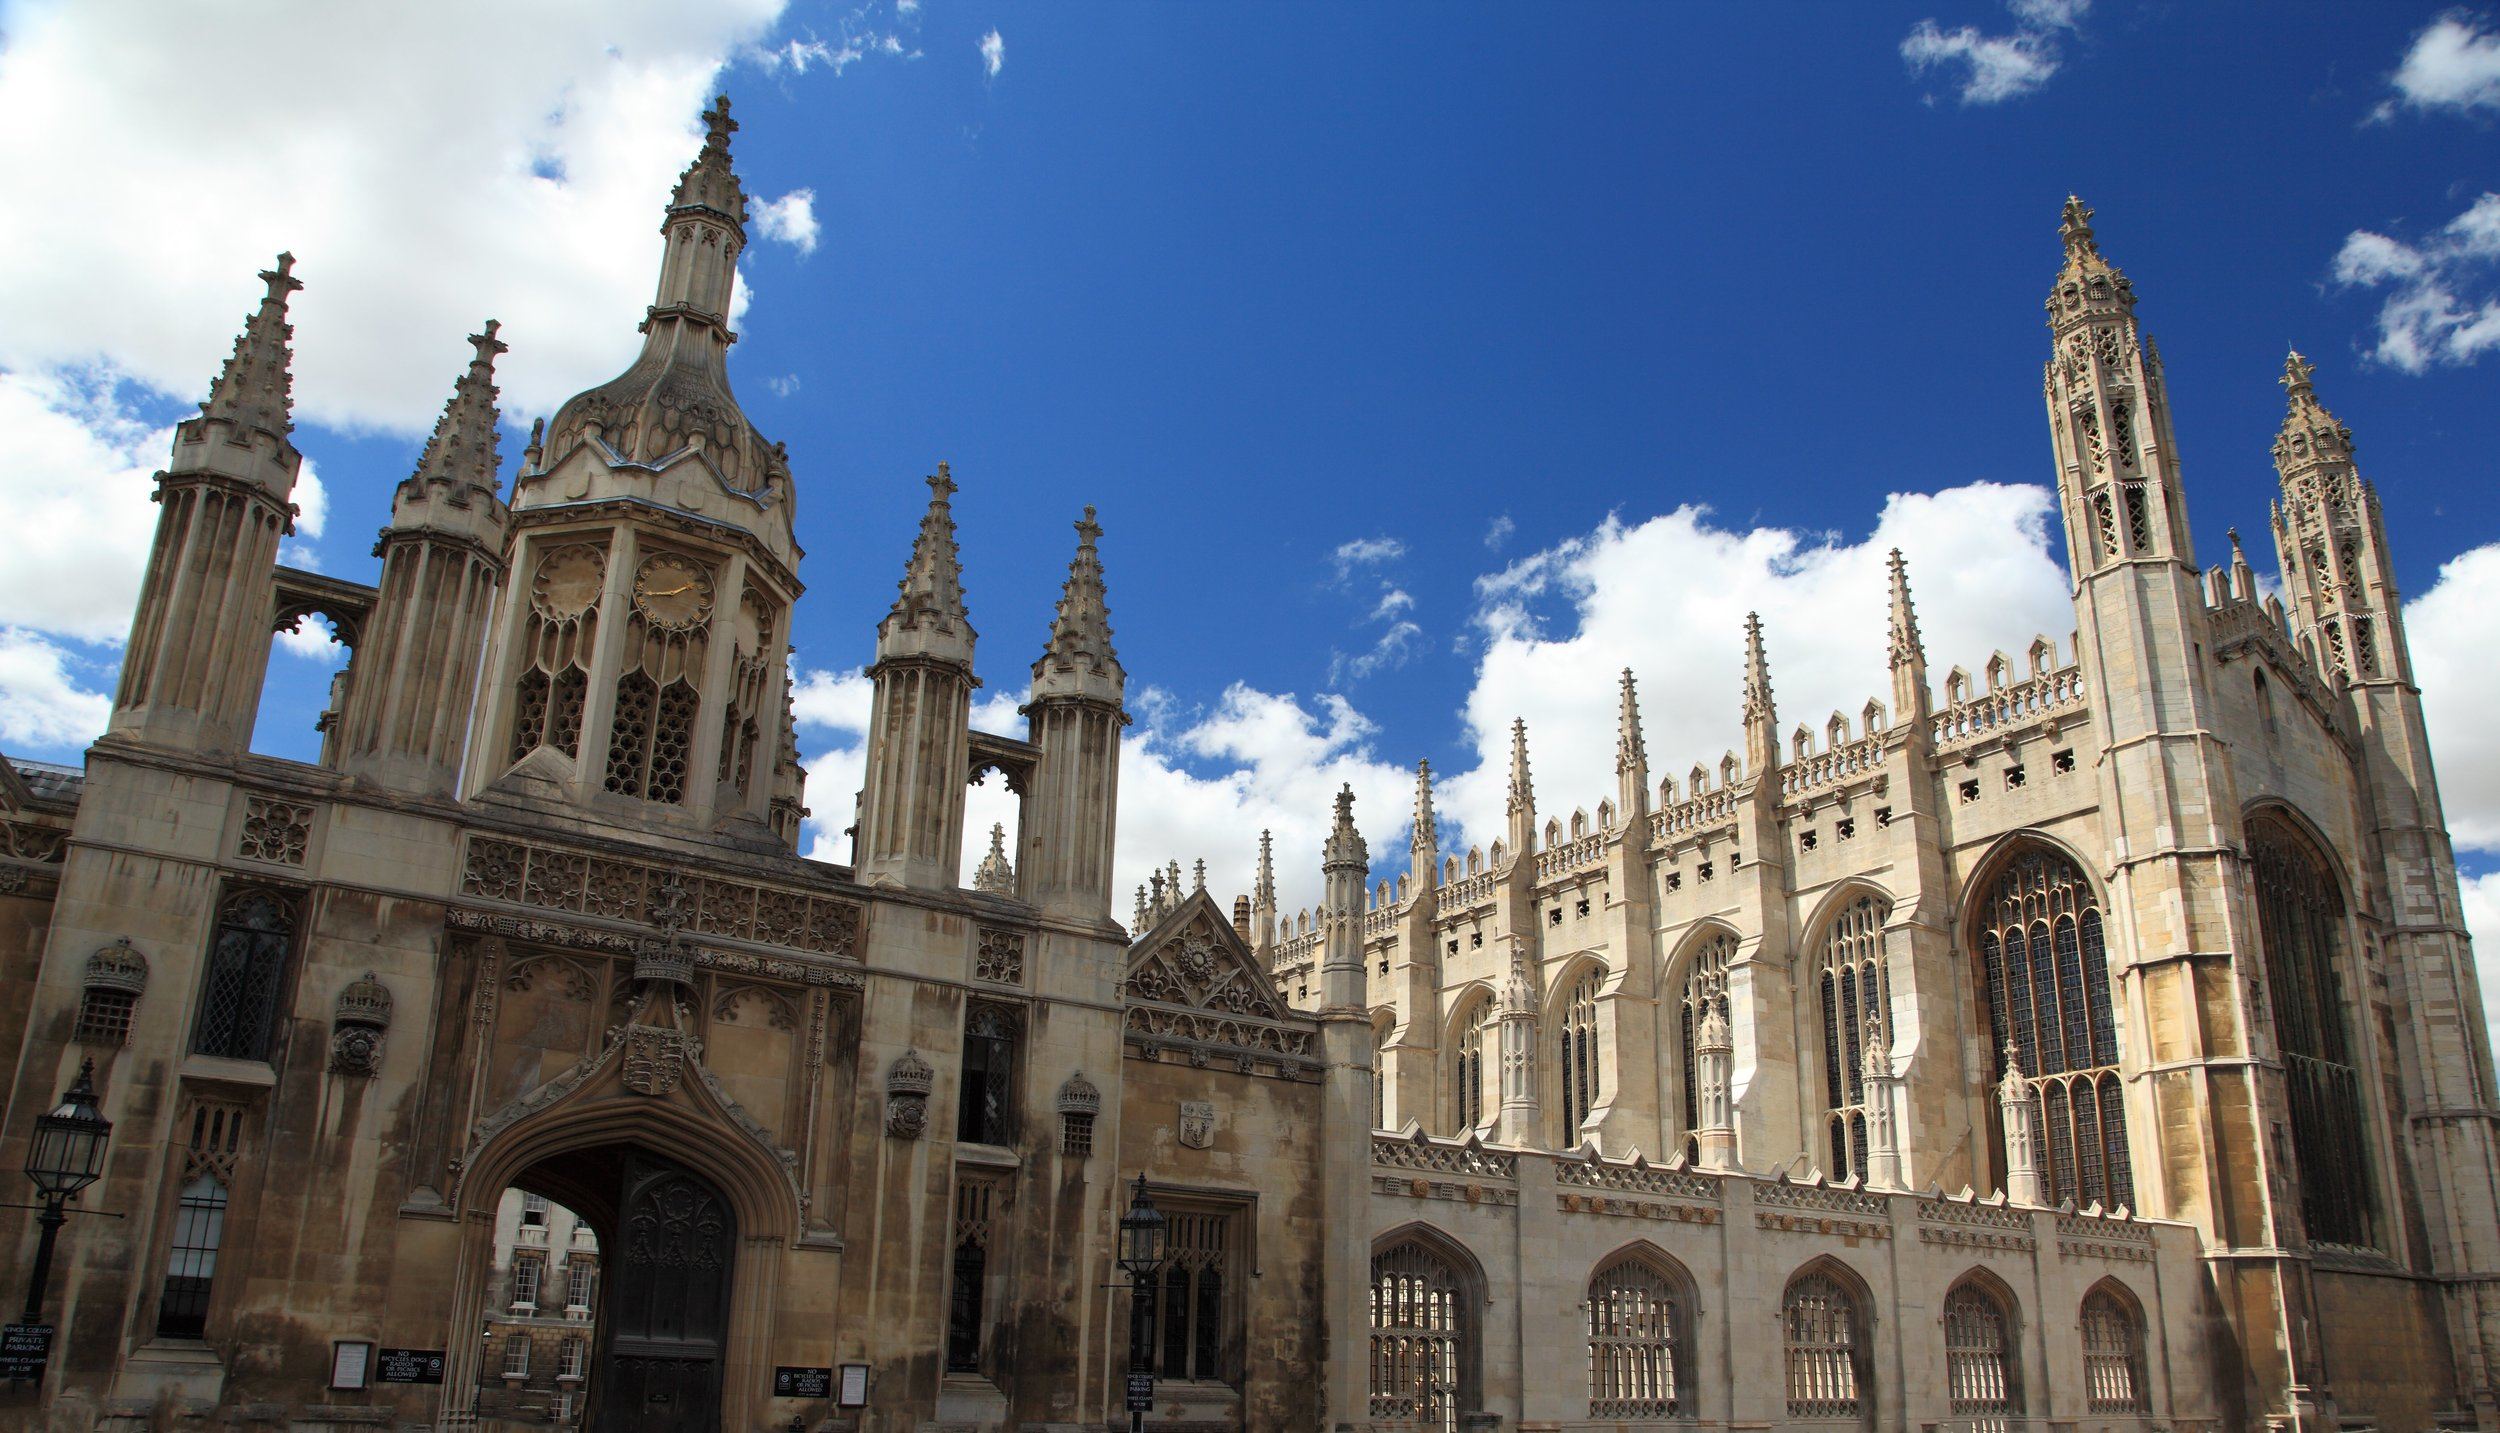 King's College and King's College Chapel